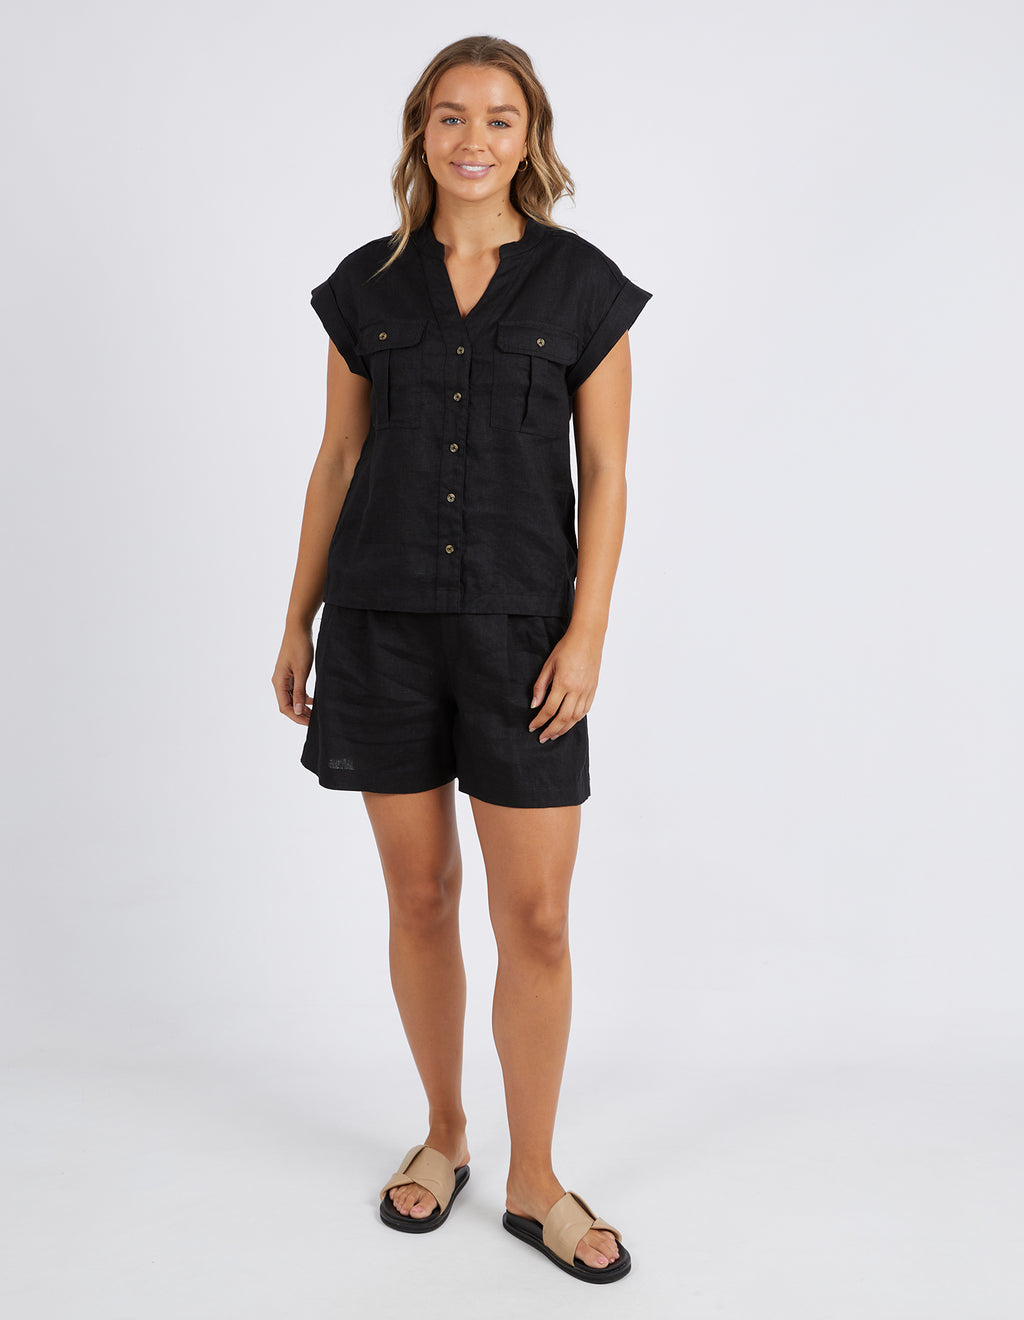 the harlow shirt by foxwood is a black button up the front top in linen with short sleeves